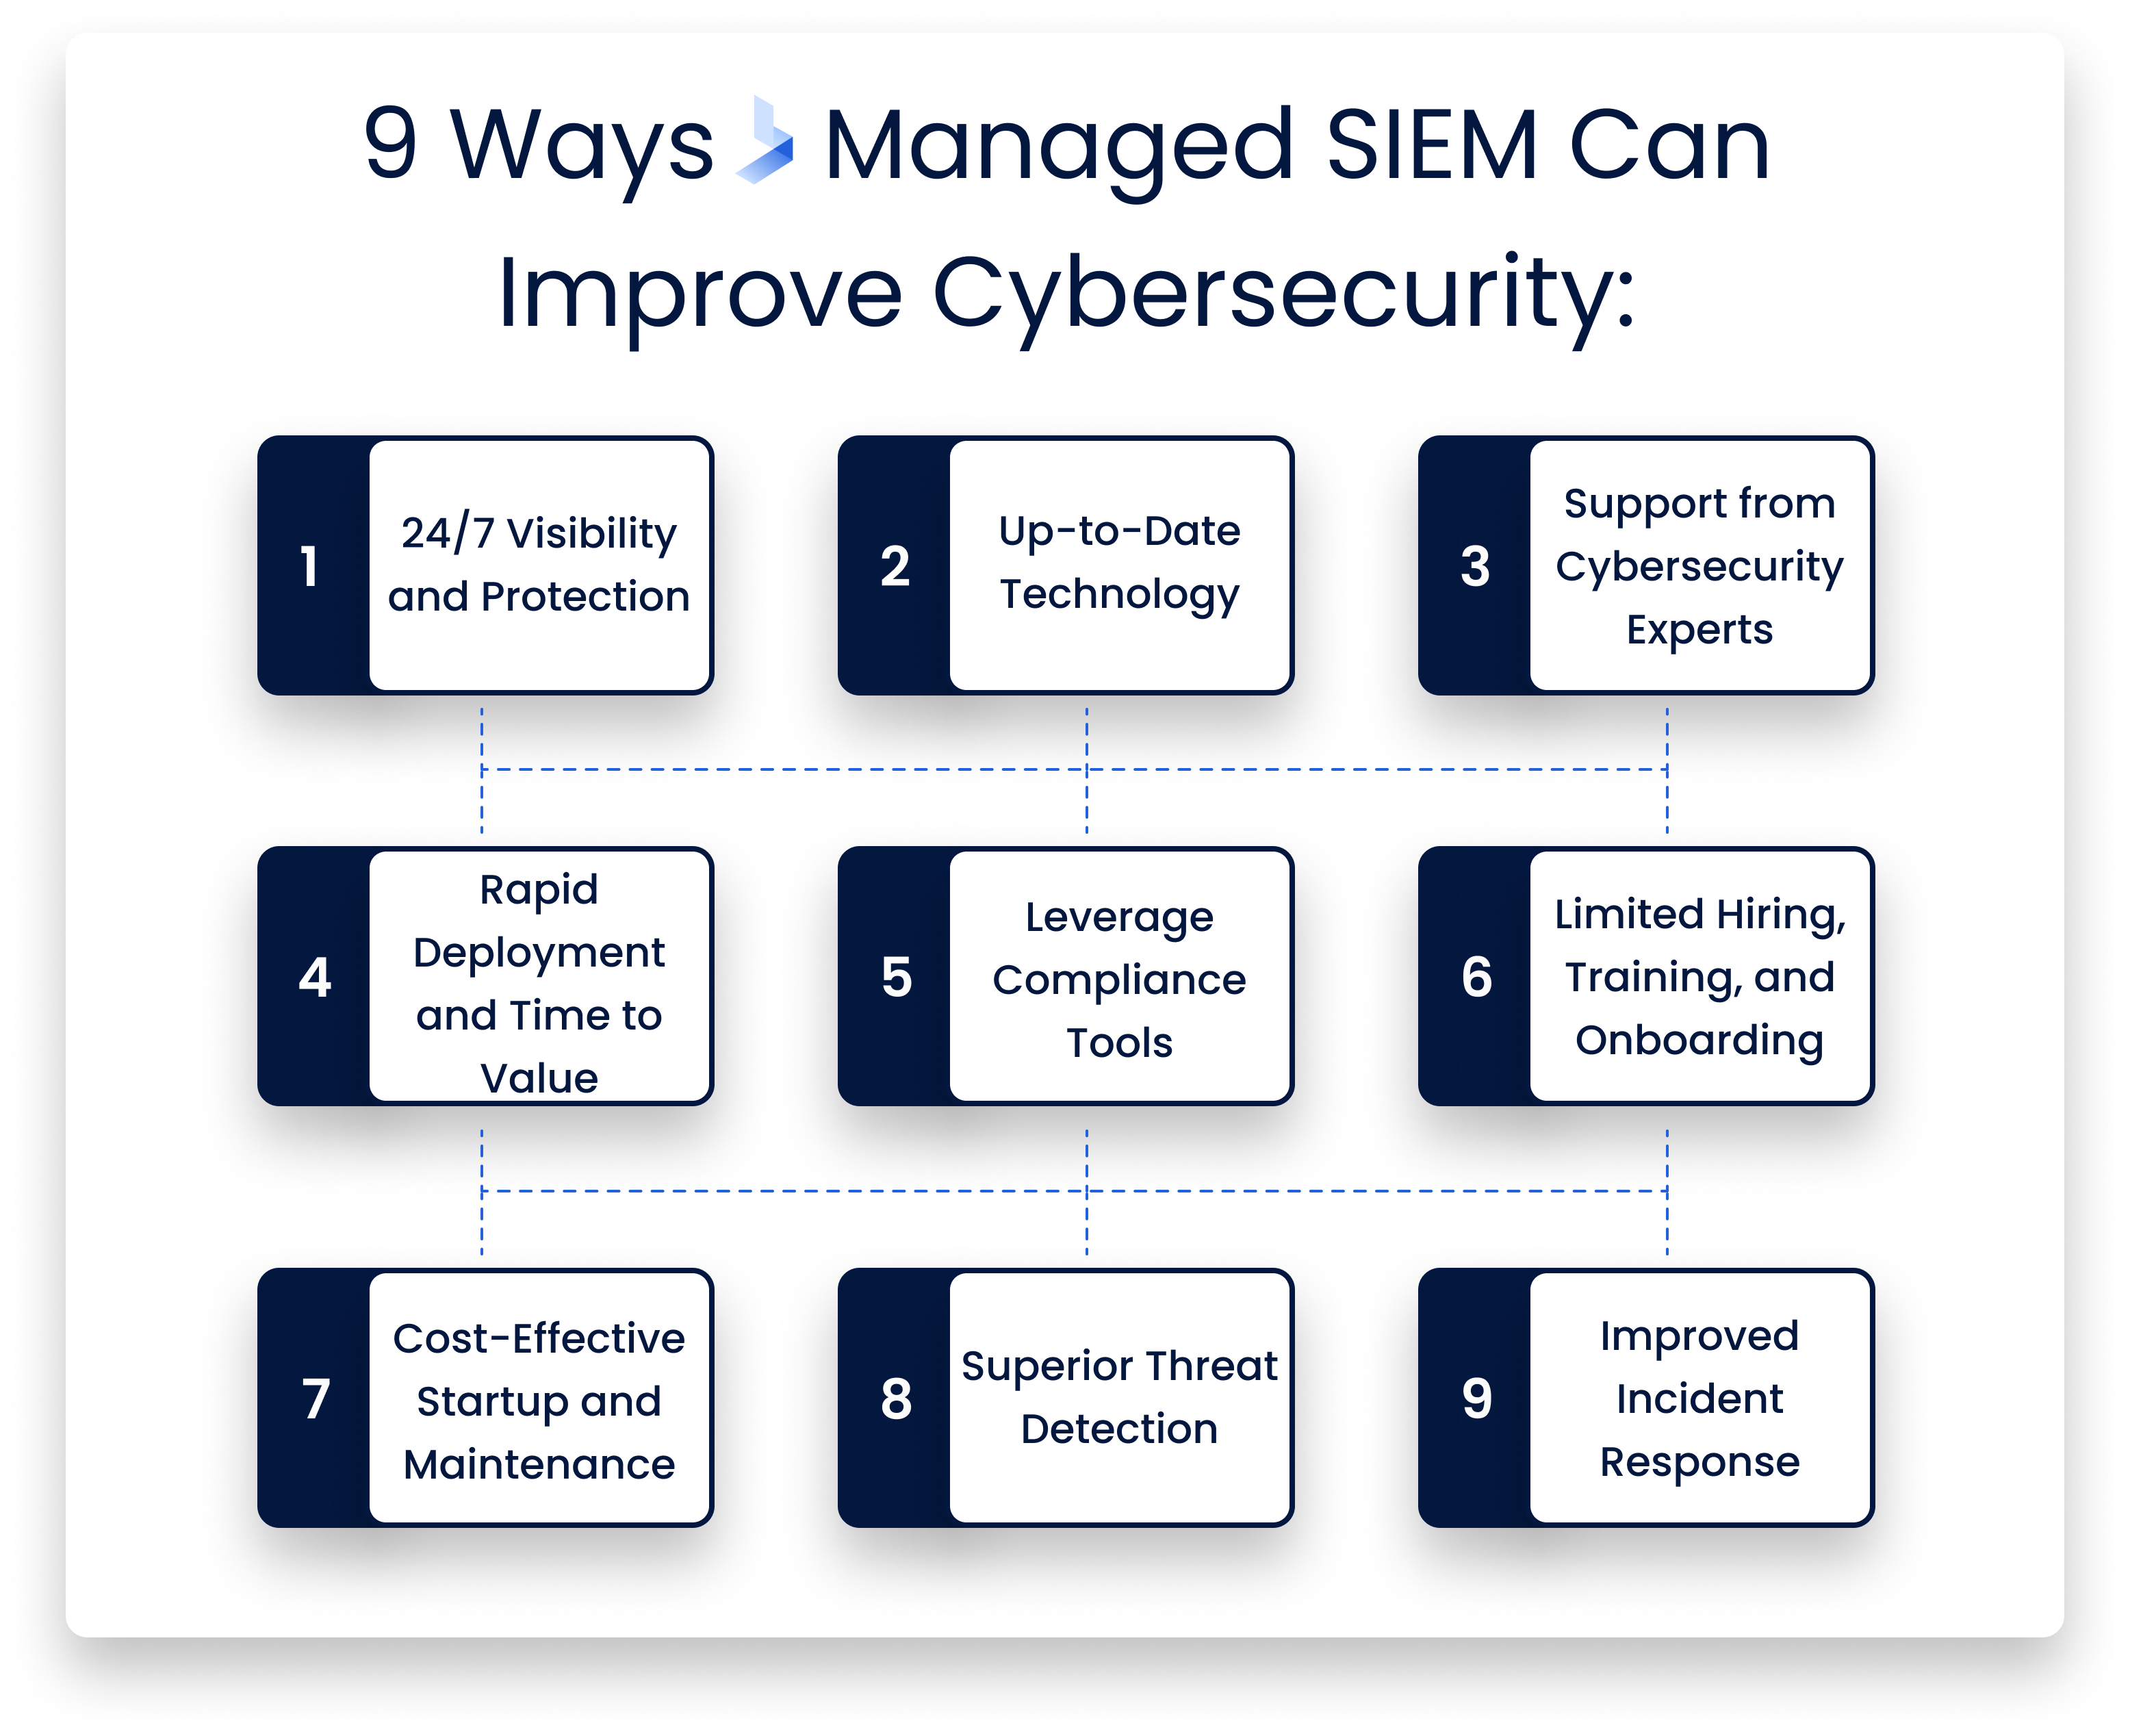 9 Ways Managed SIEM Can Improve Cybersecurity